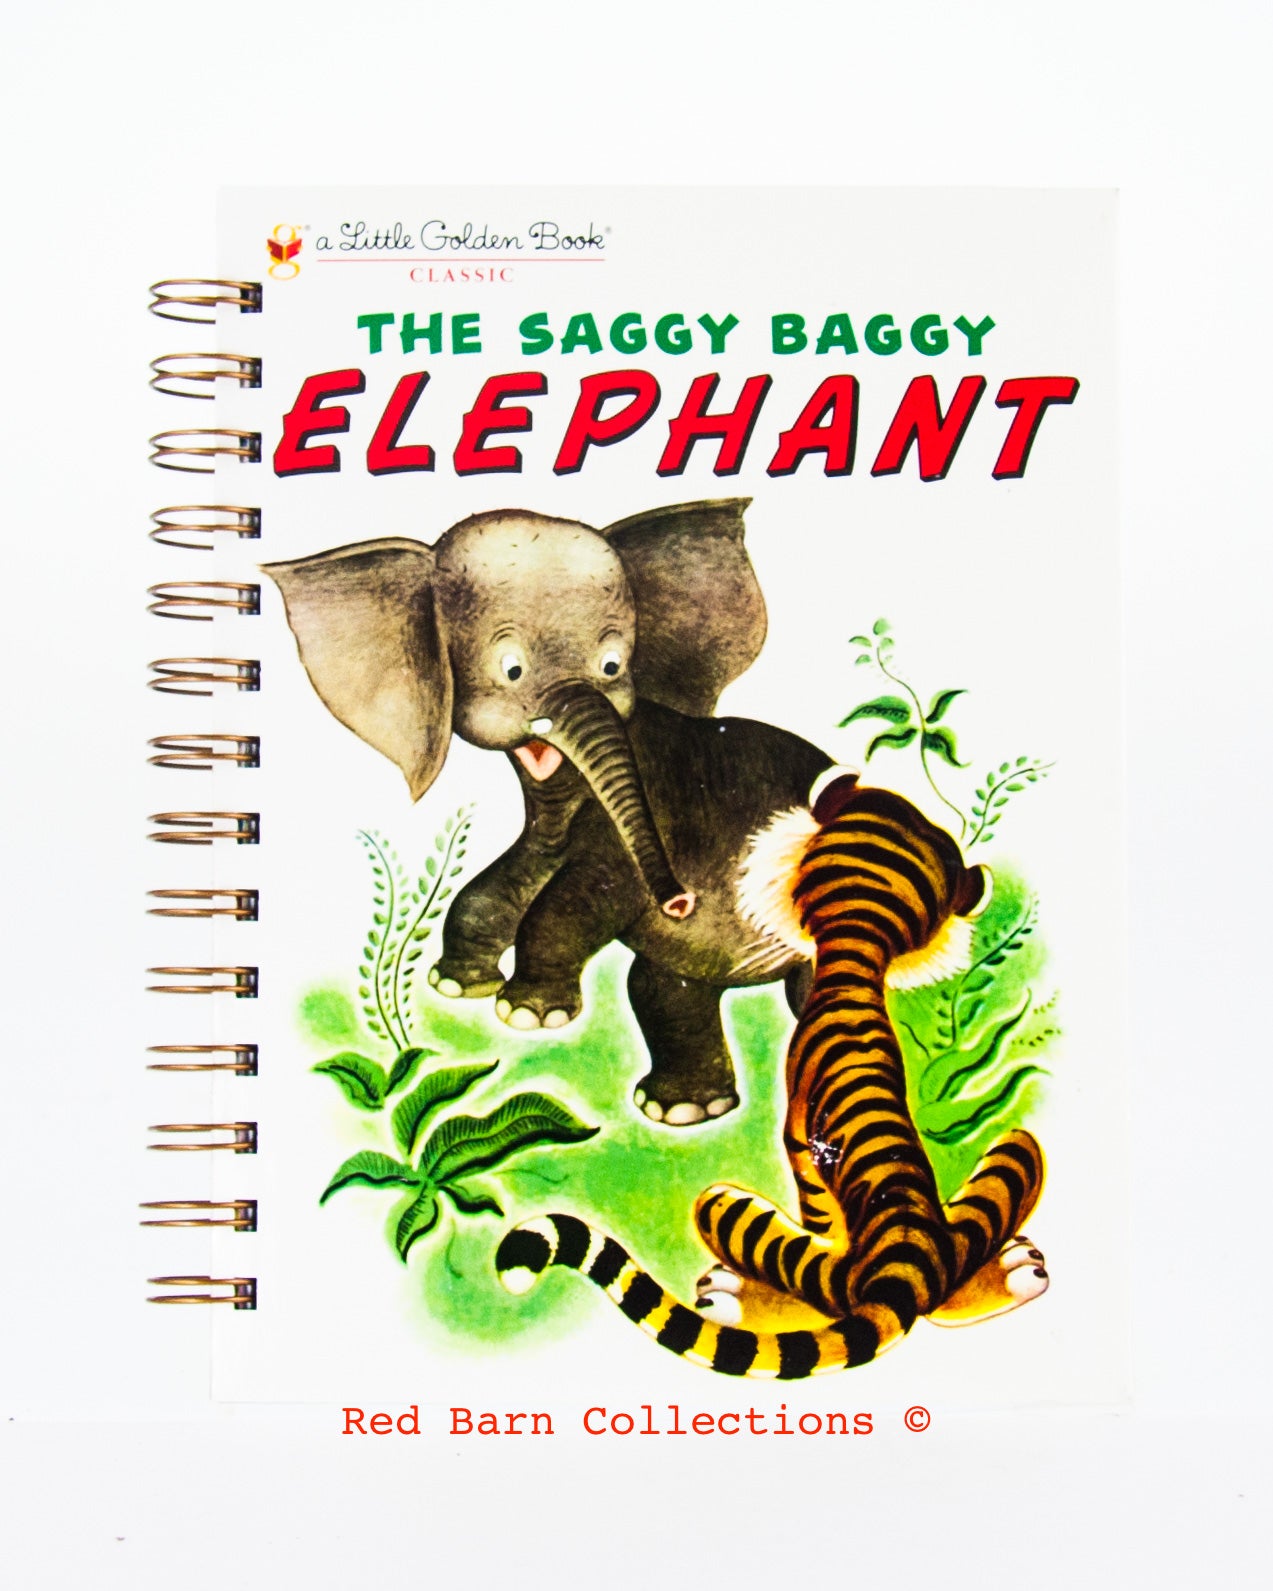 The Saggy Baggy Elephant-Red Barn Collections